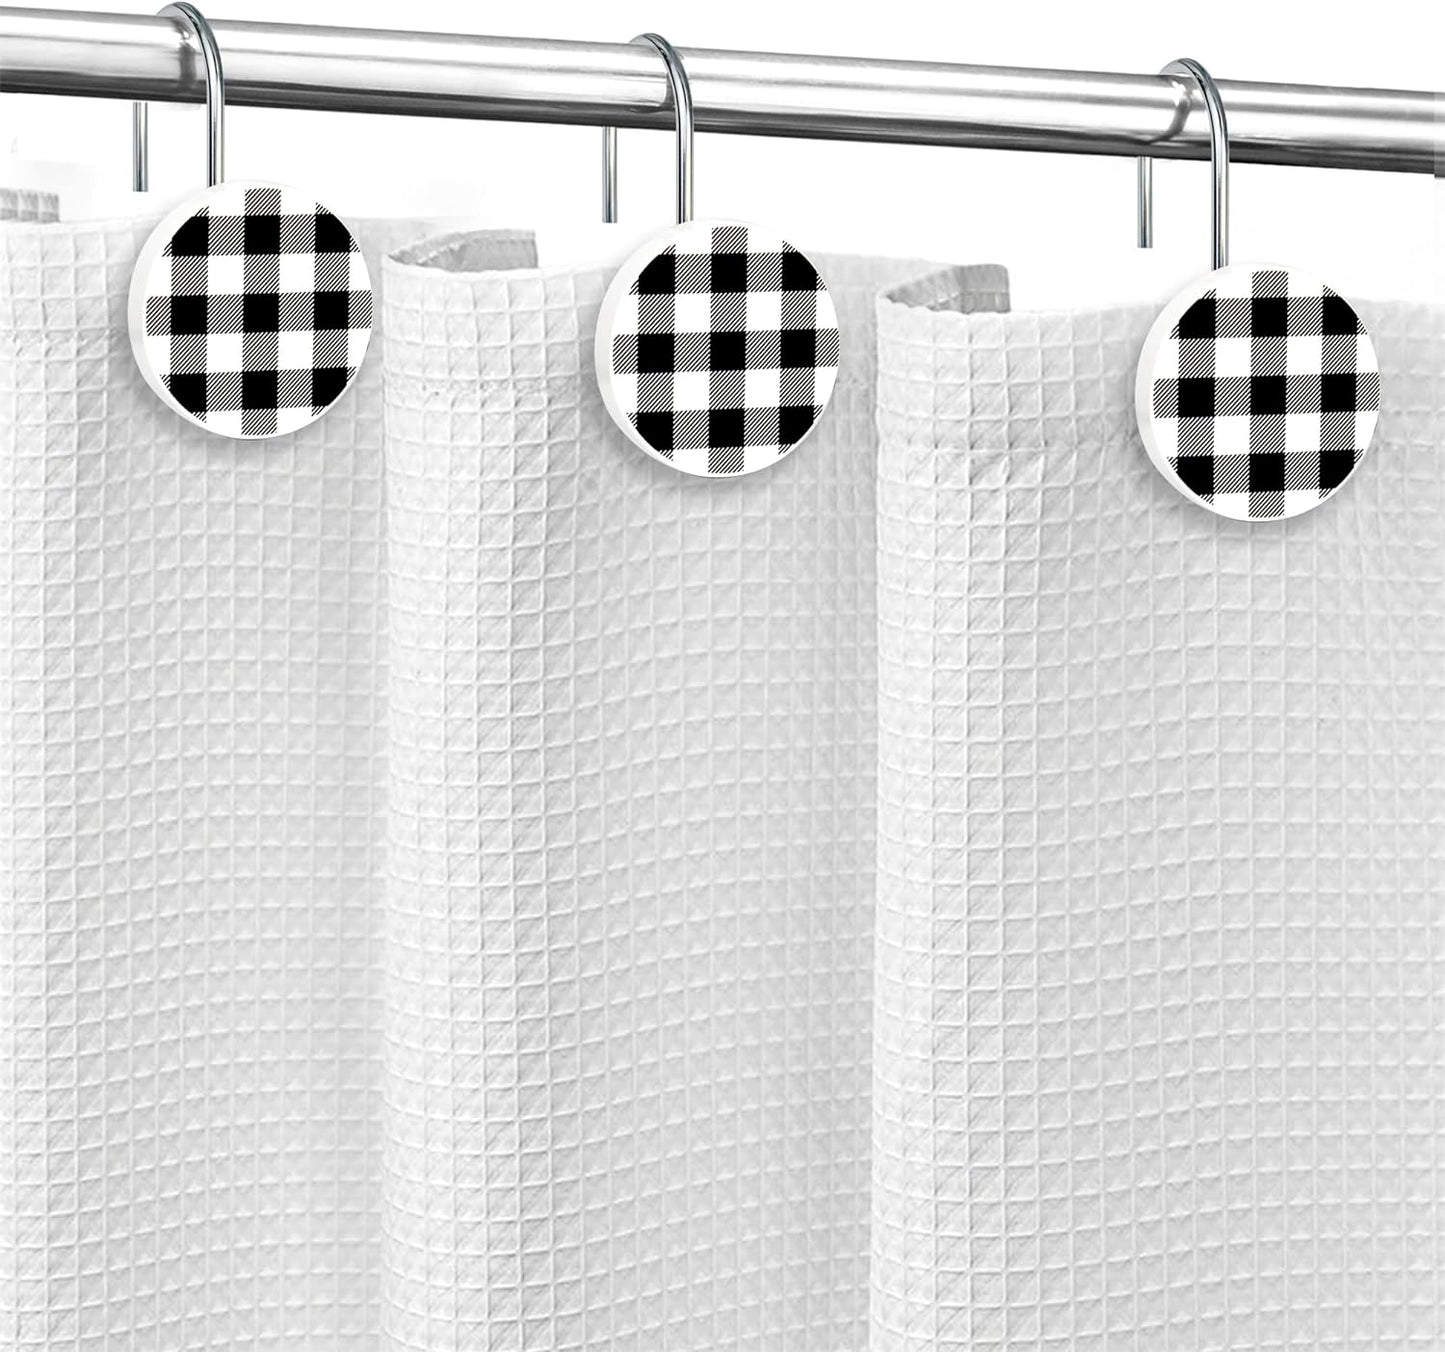 Christmas Decorative Shower Curtain Hooks, Plaid Buffalo Check Shower Curtain Rings, Xmas Classic Decor for Bathroom Home, Round Shower Curtain Hangers, Set of 12, White Black Red Green